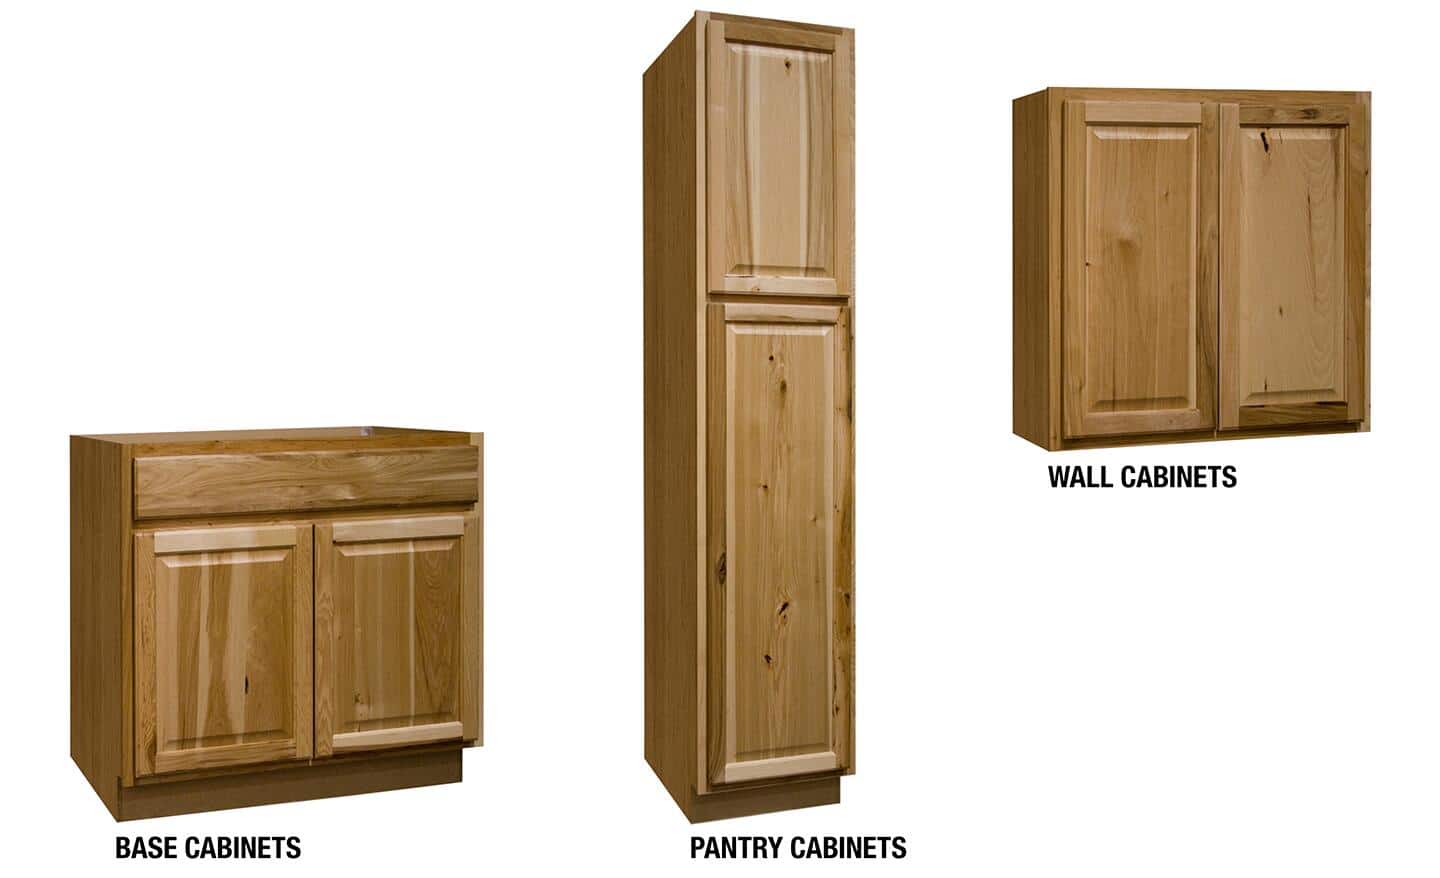 Kitchen base, pantry and wall cabinets in a modern hickory finish and style.